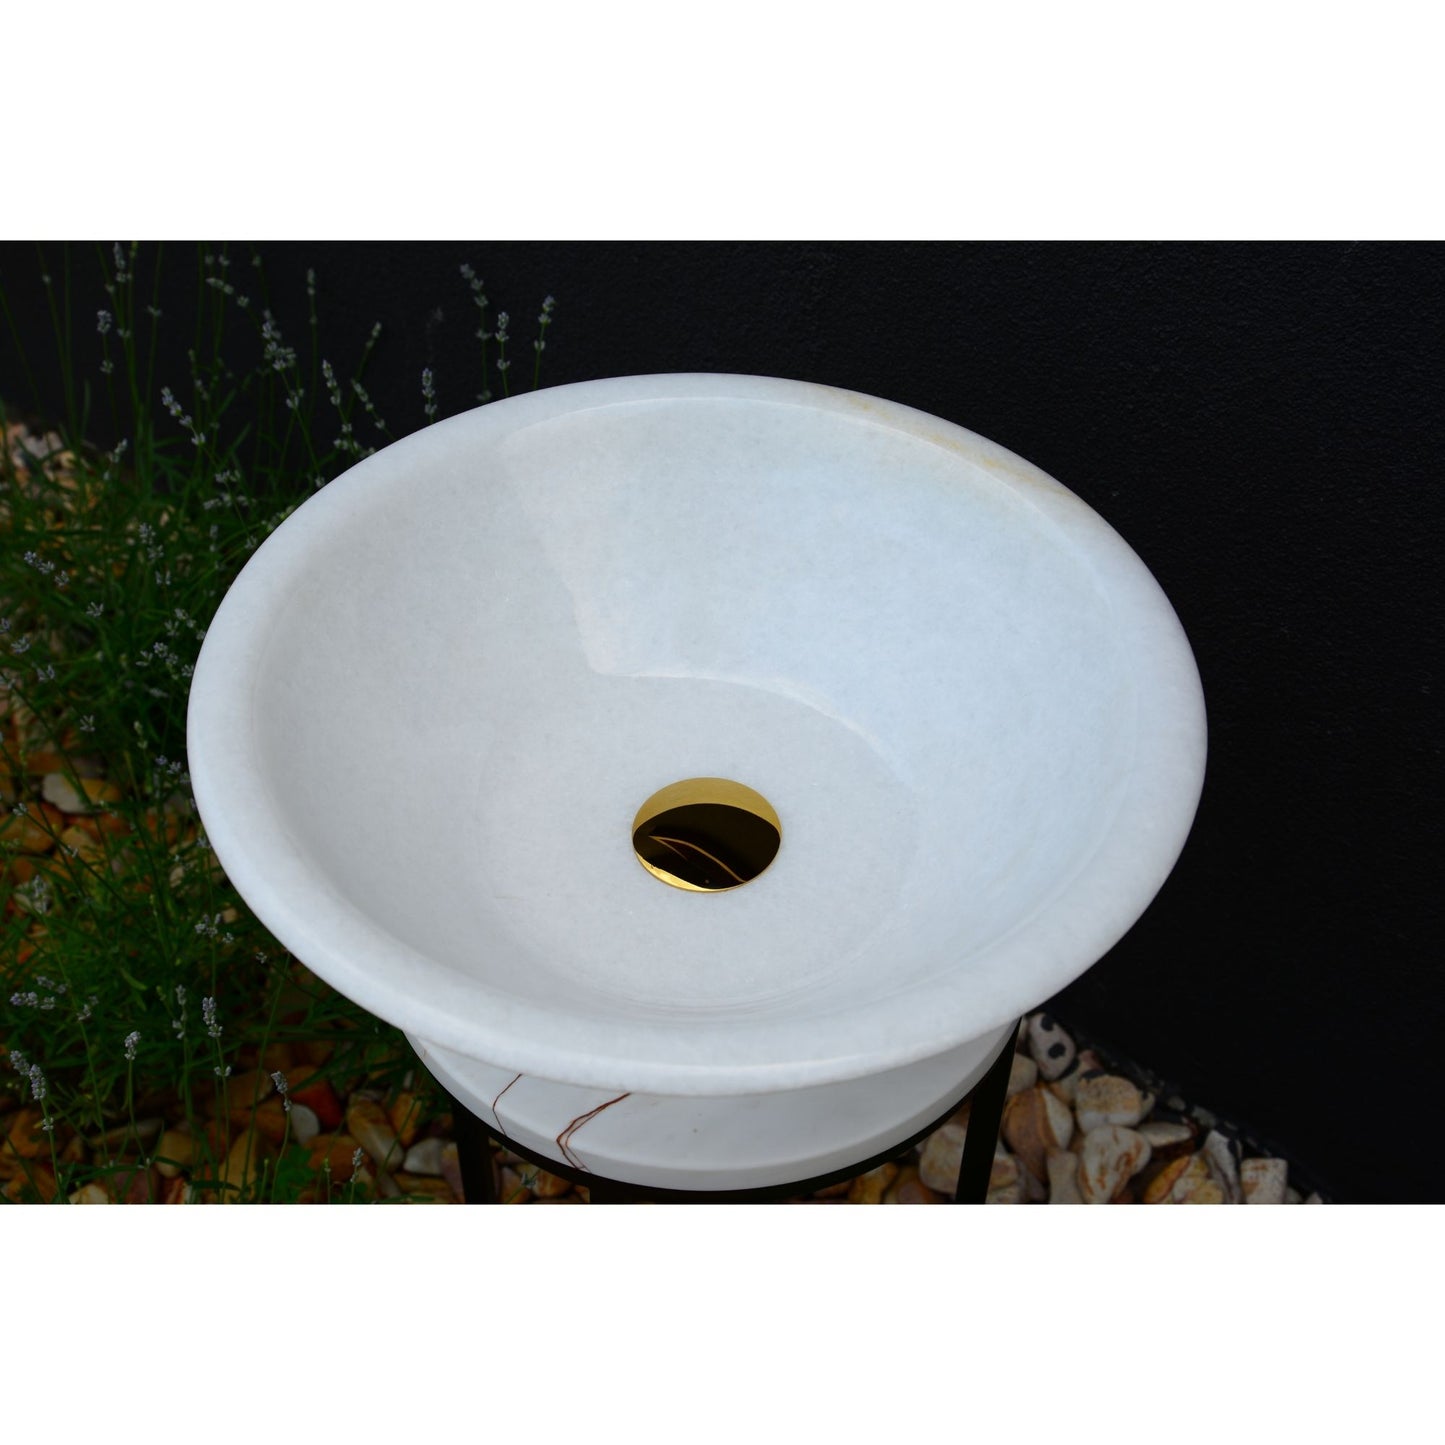 Handcrafted White Marble Sink